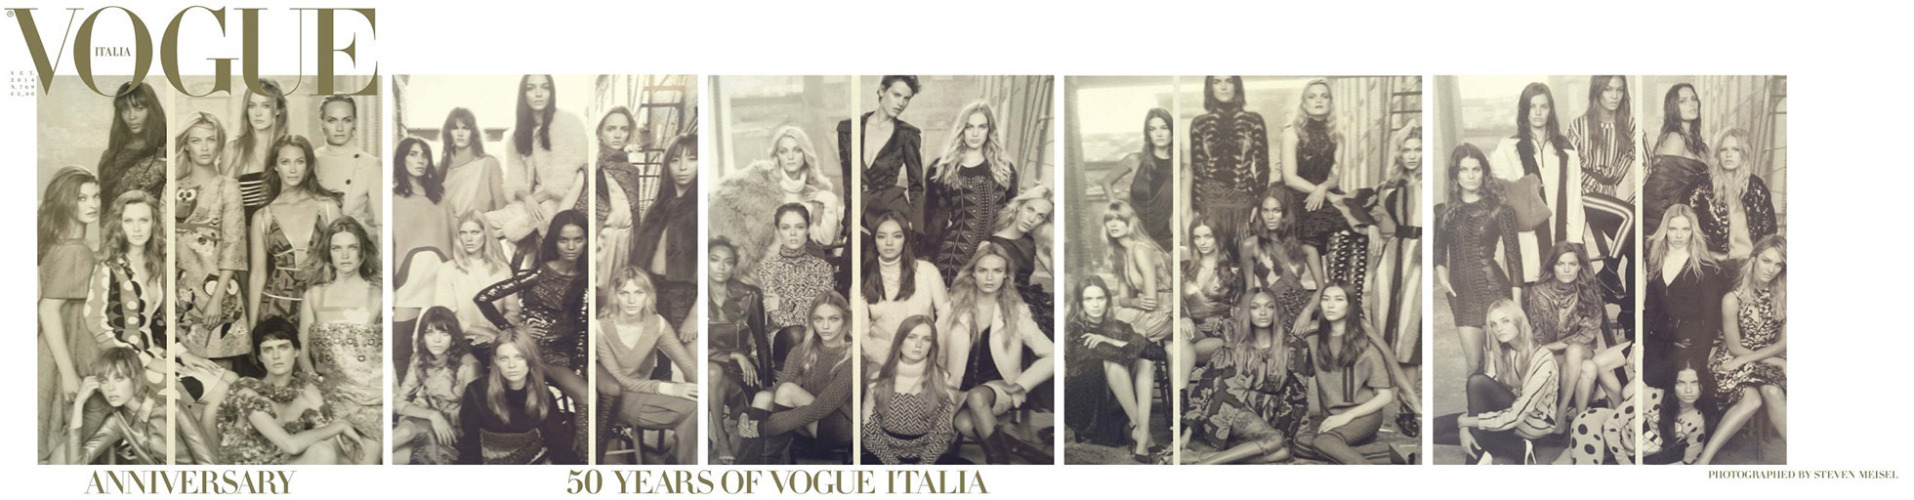 mirnah:
“The September 2014 cover of Vogue Italia tapped a jaw-dropping fifty models to appear on its fiftieth anniversary issue. The list includes everyone from 90s supermodels Linda Evangelista and Naomi Campbell to Victoria’s Secret Angels Adriana...